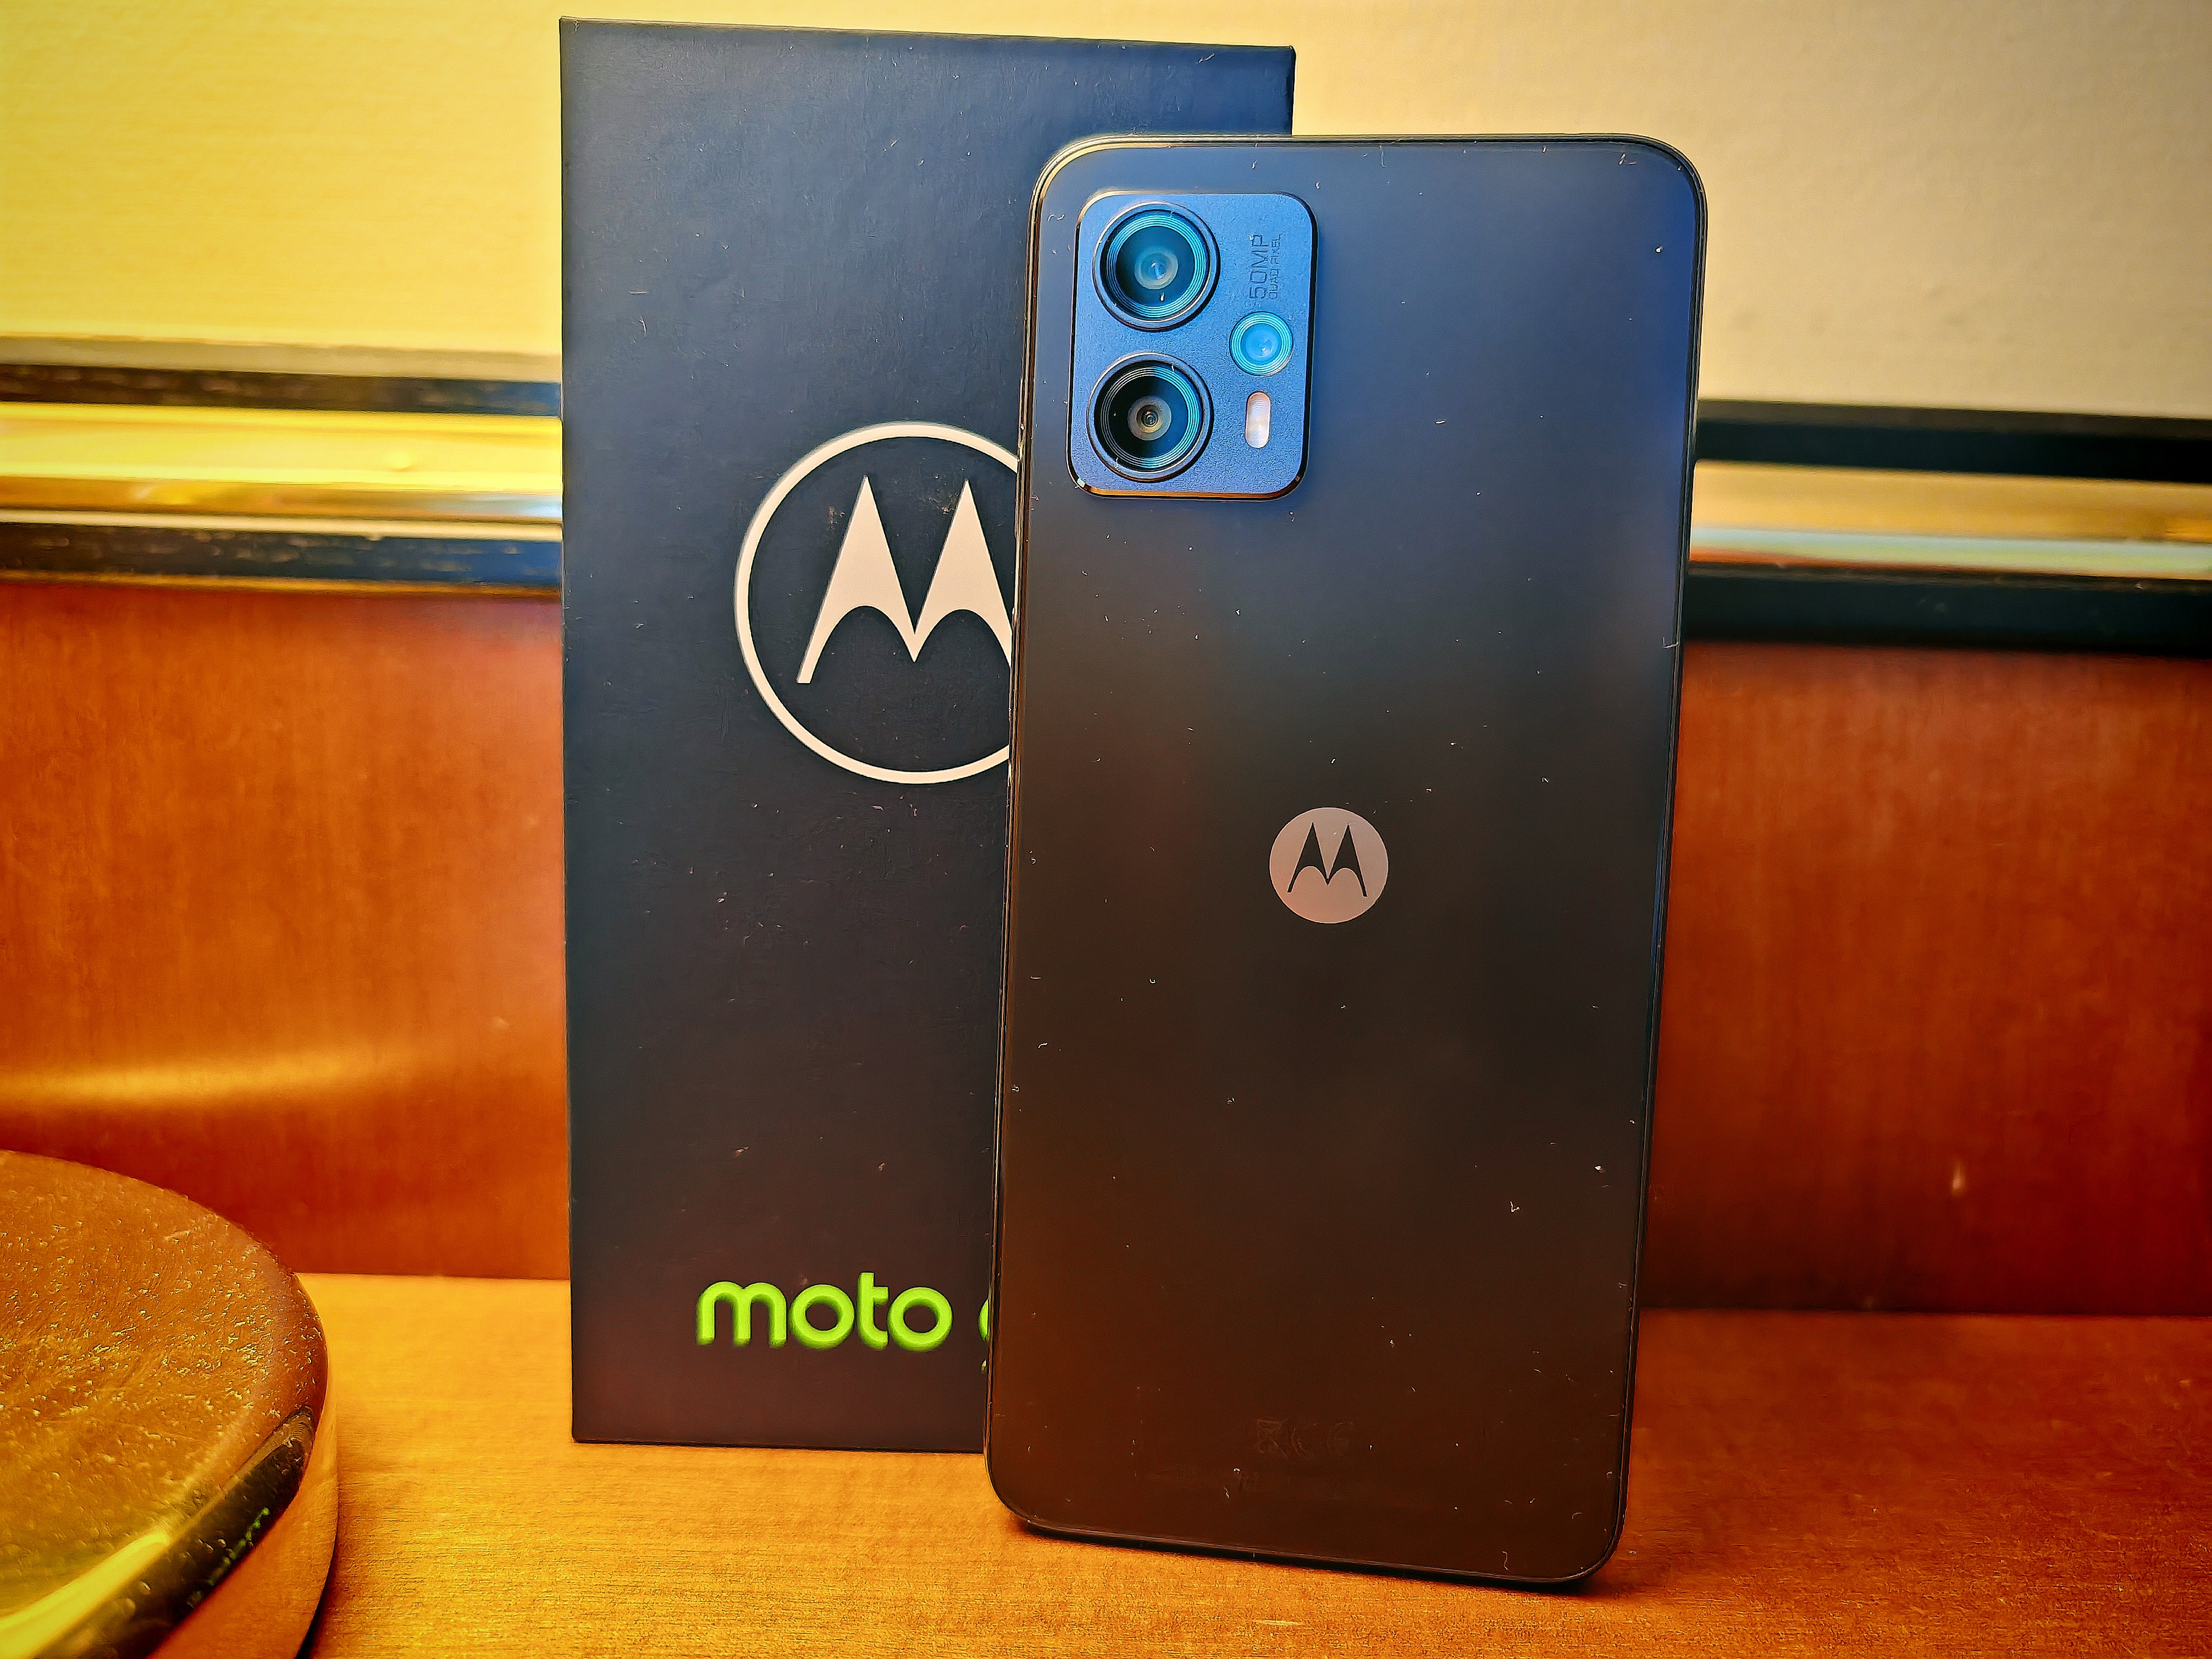 Moto G23 smartphone review: Too many simplifications